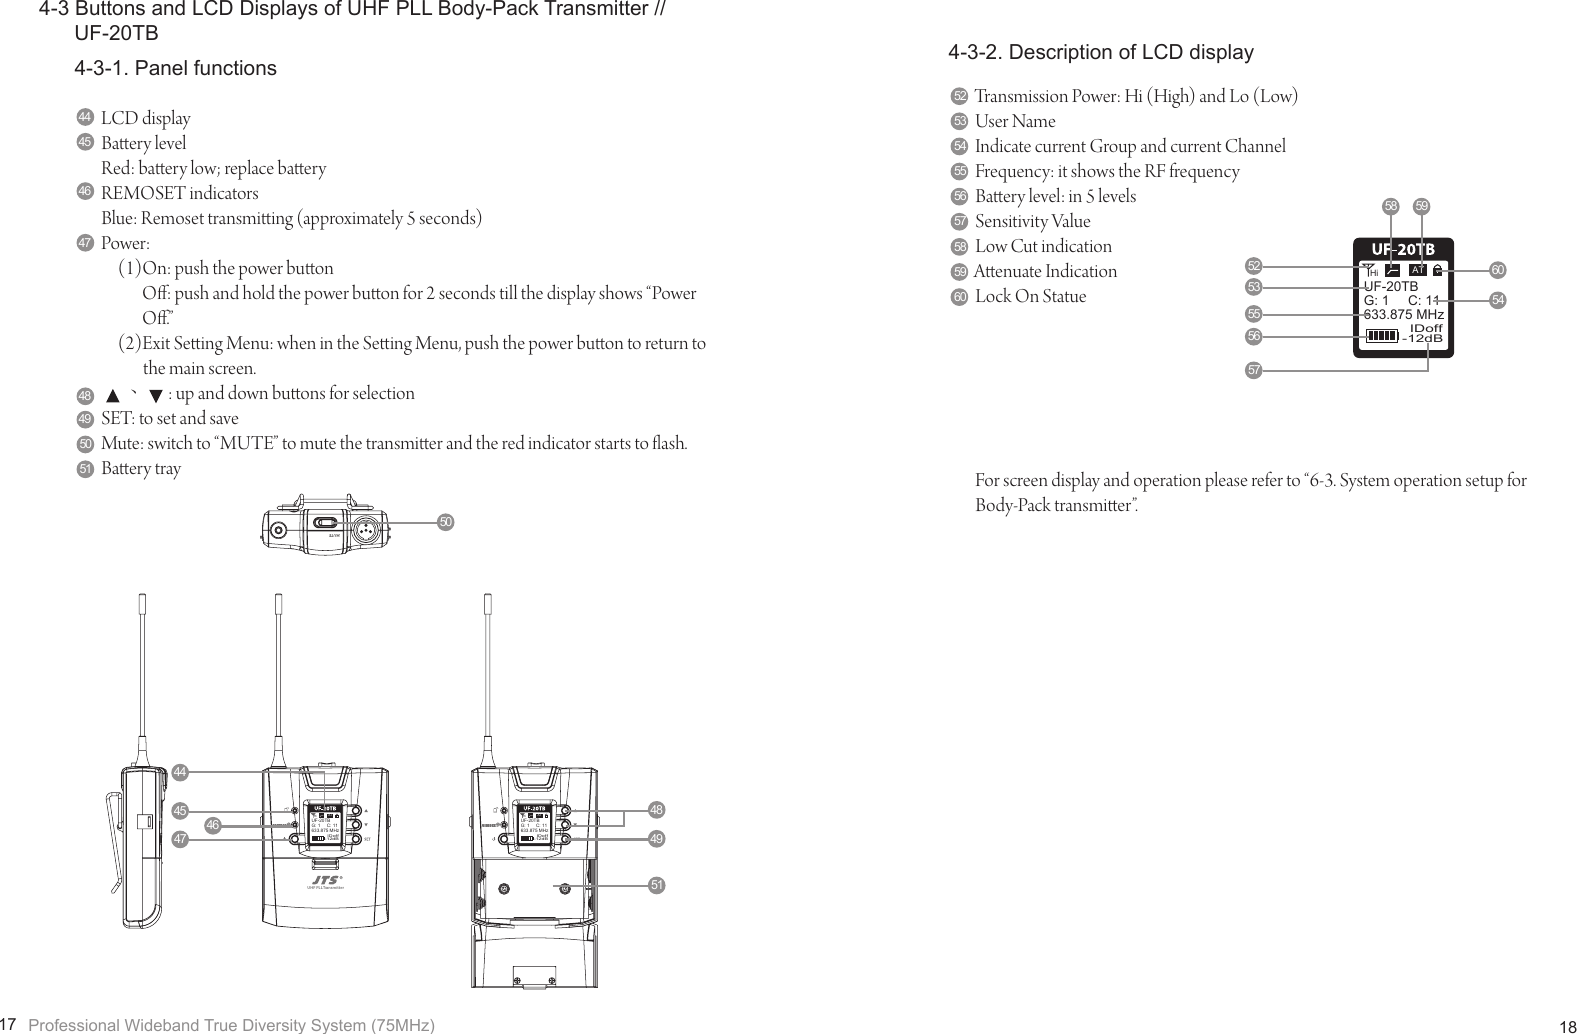 Page 12 of JTS Professional Co JSS-20 UHF PLL Handheld Transmitter User Manual 